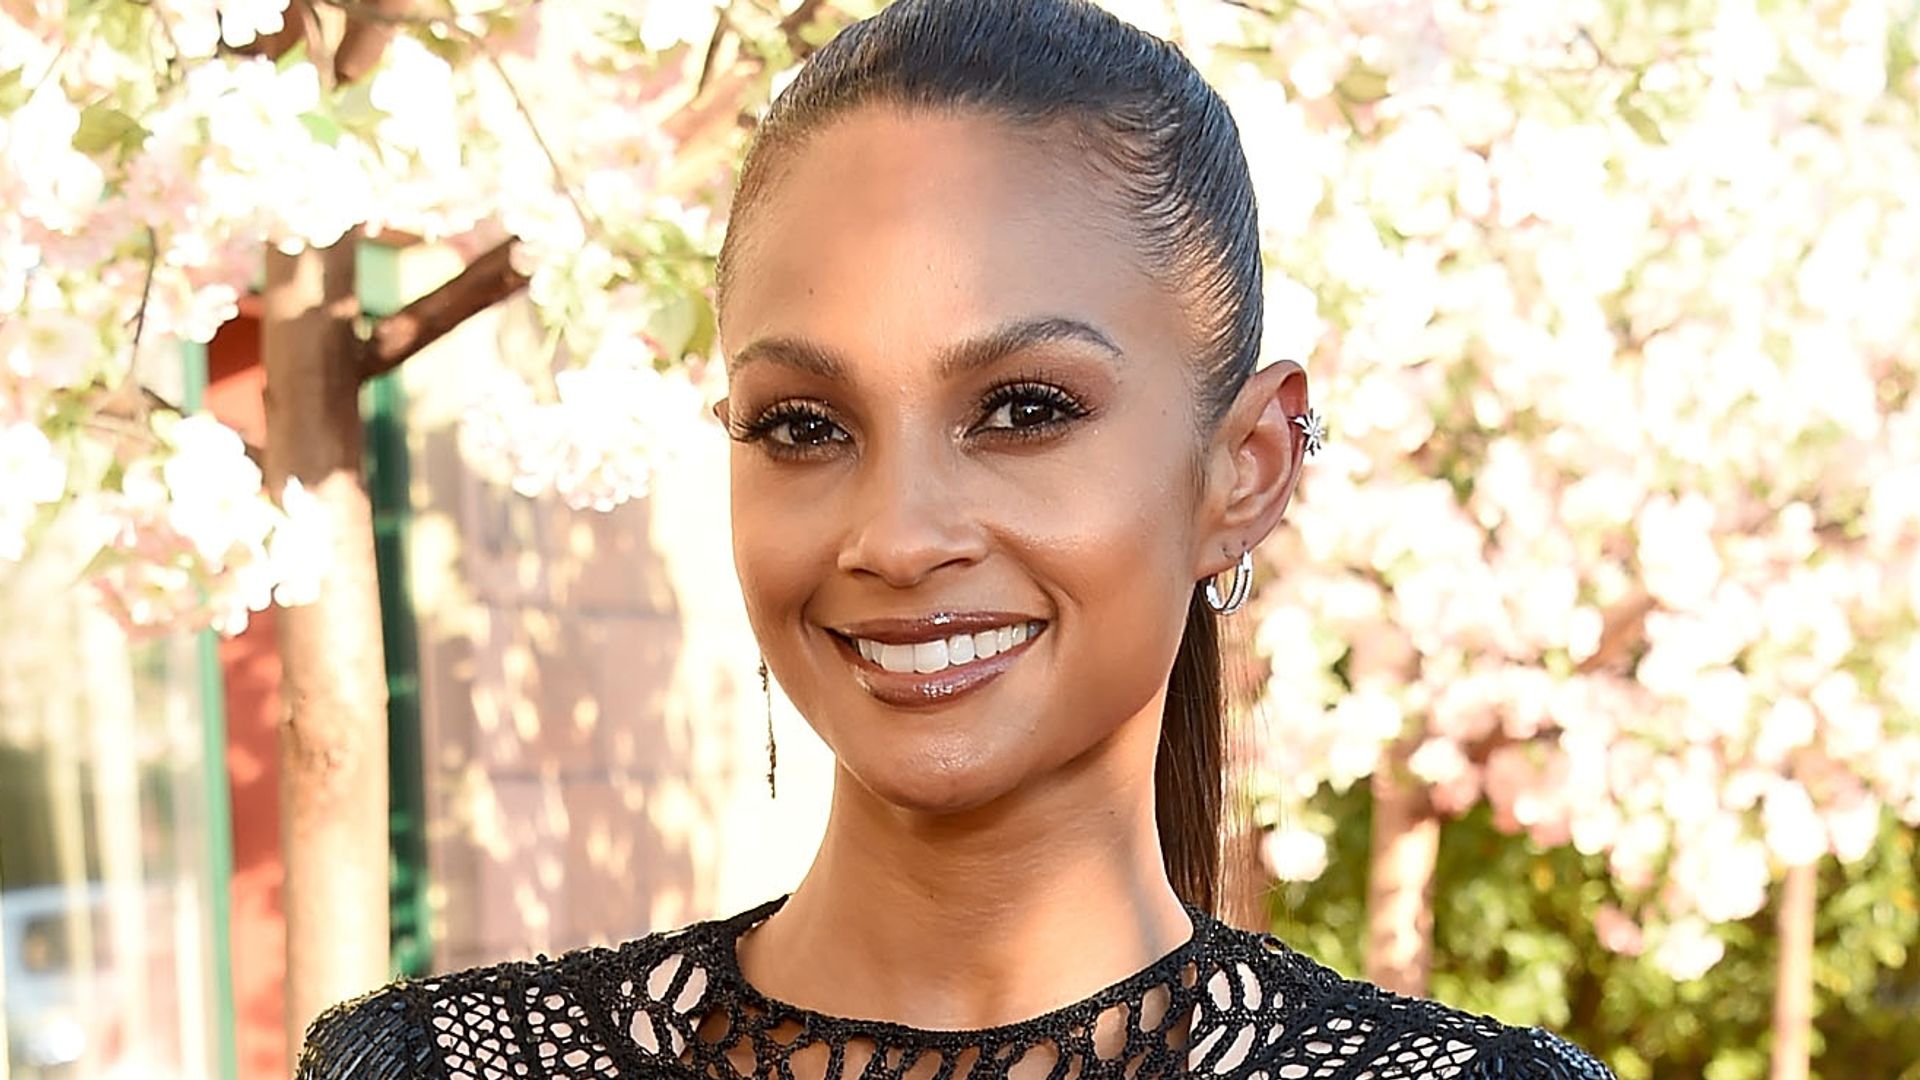 Alesha Dixon in a black dress with white flowers in the background